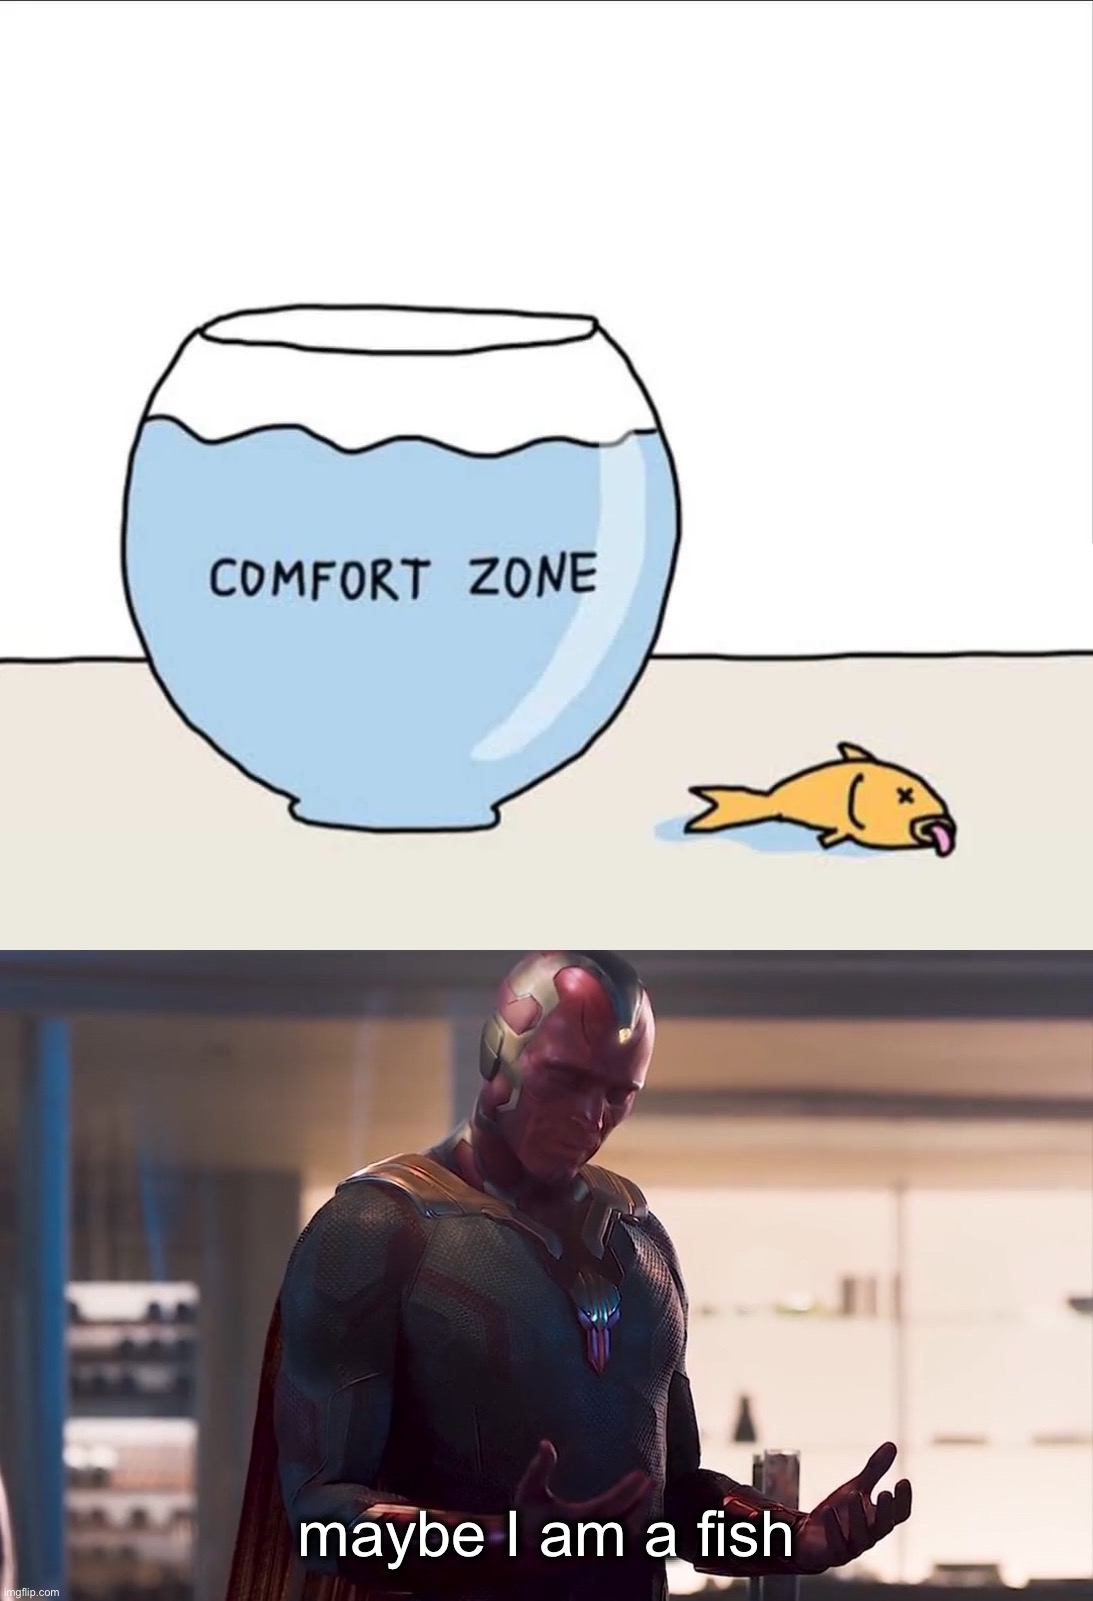 e | maybe I am a fish | image tagged in maybe i am a monster,fish,comfort zone,relatable,memes,me irl | made w/ Imgflip meme maker